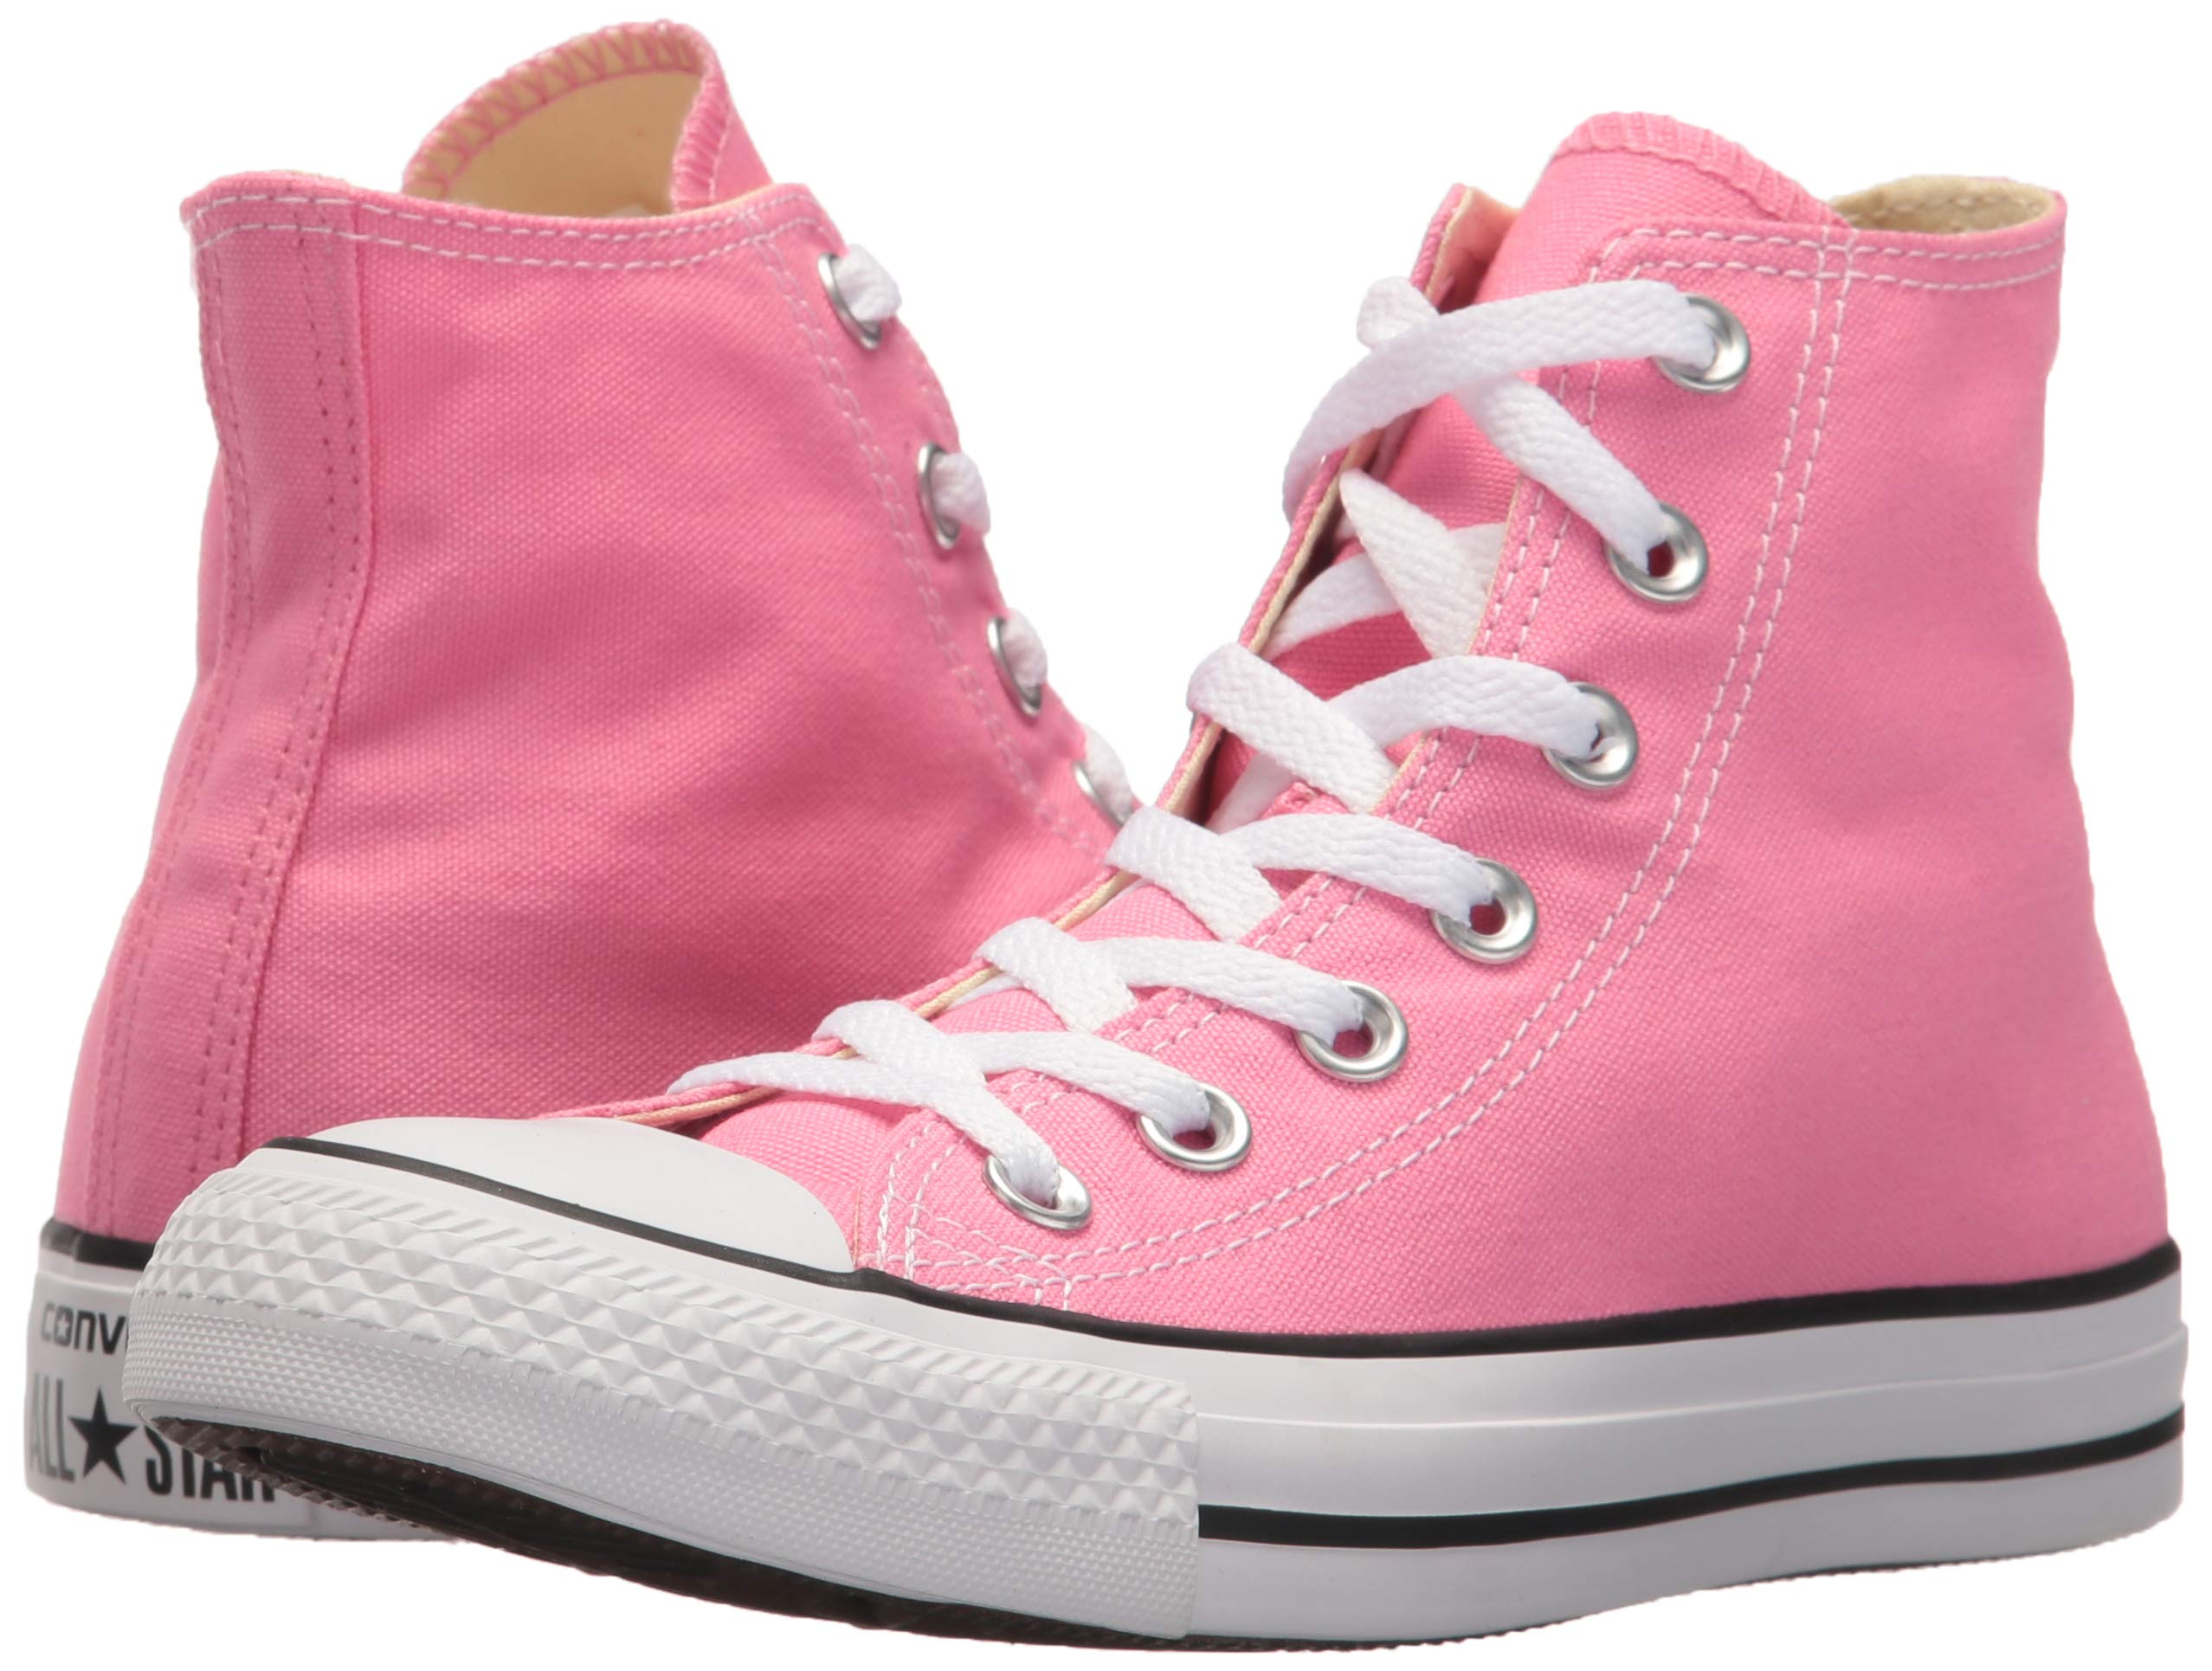 Converse Chuck Taylor All Star Hi Pink High-Top Fashion Sneaker - 6.5M / 4.5M - image 5 of 10